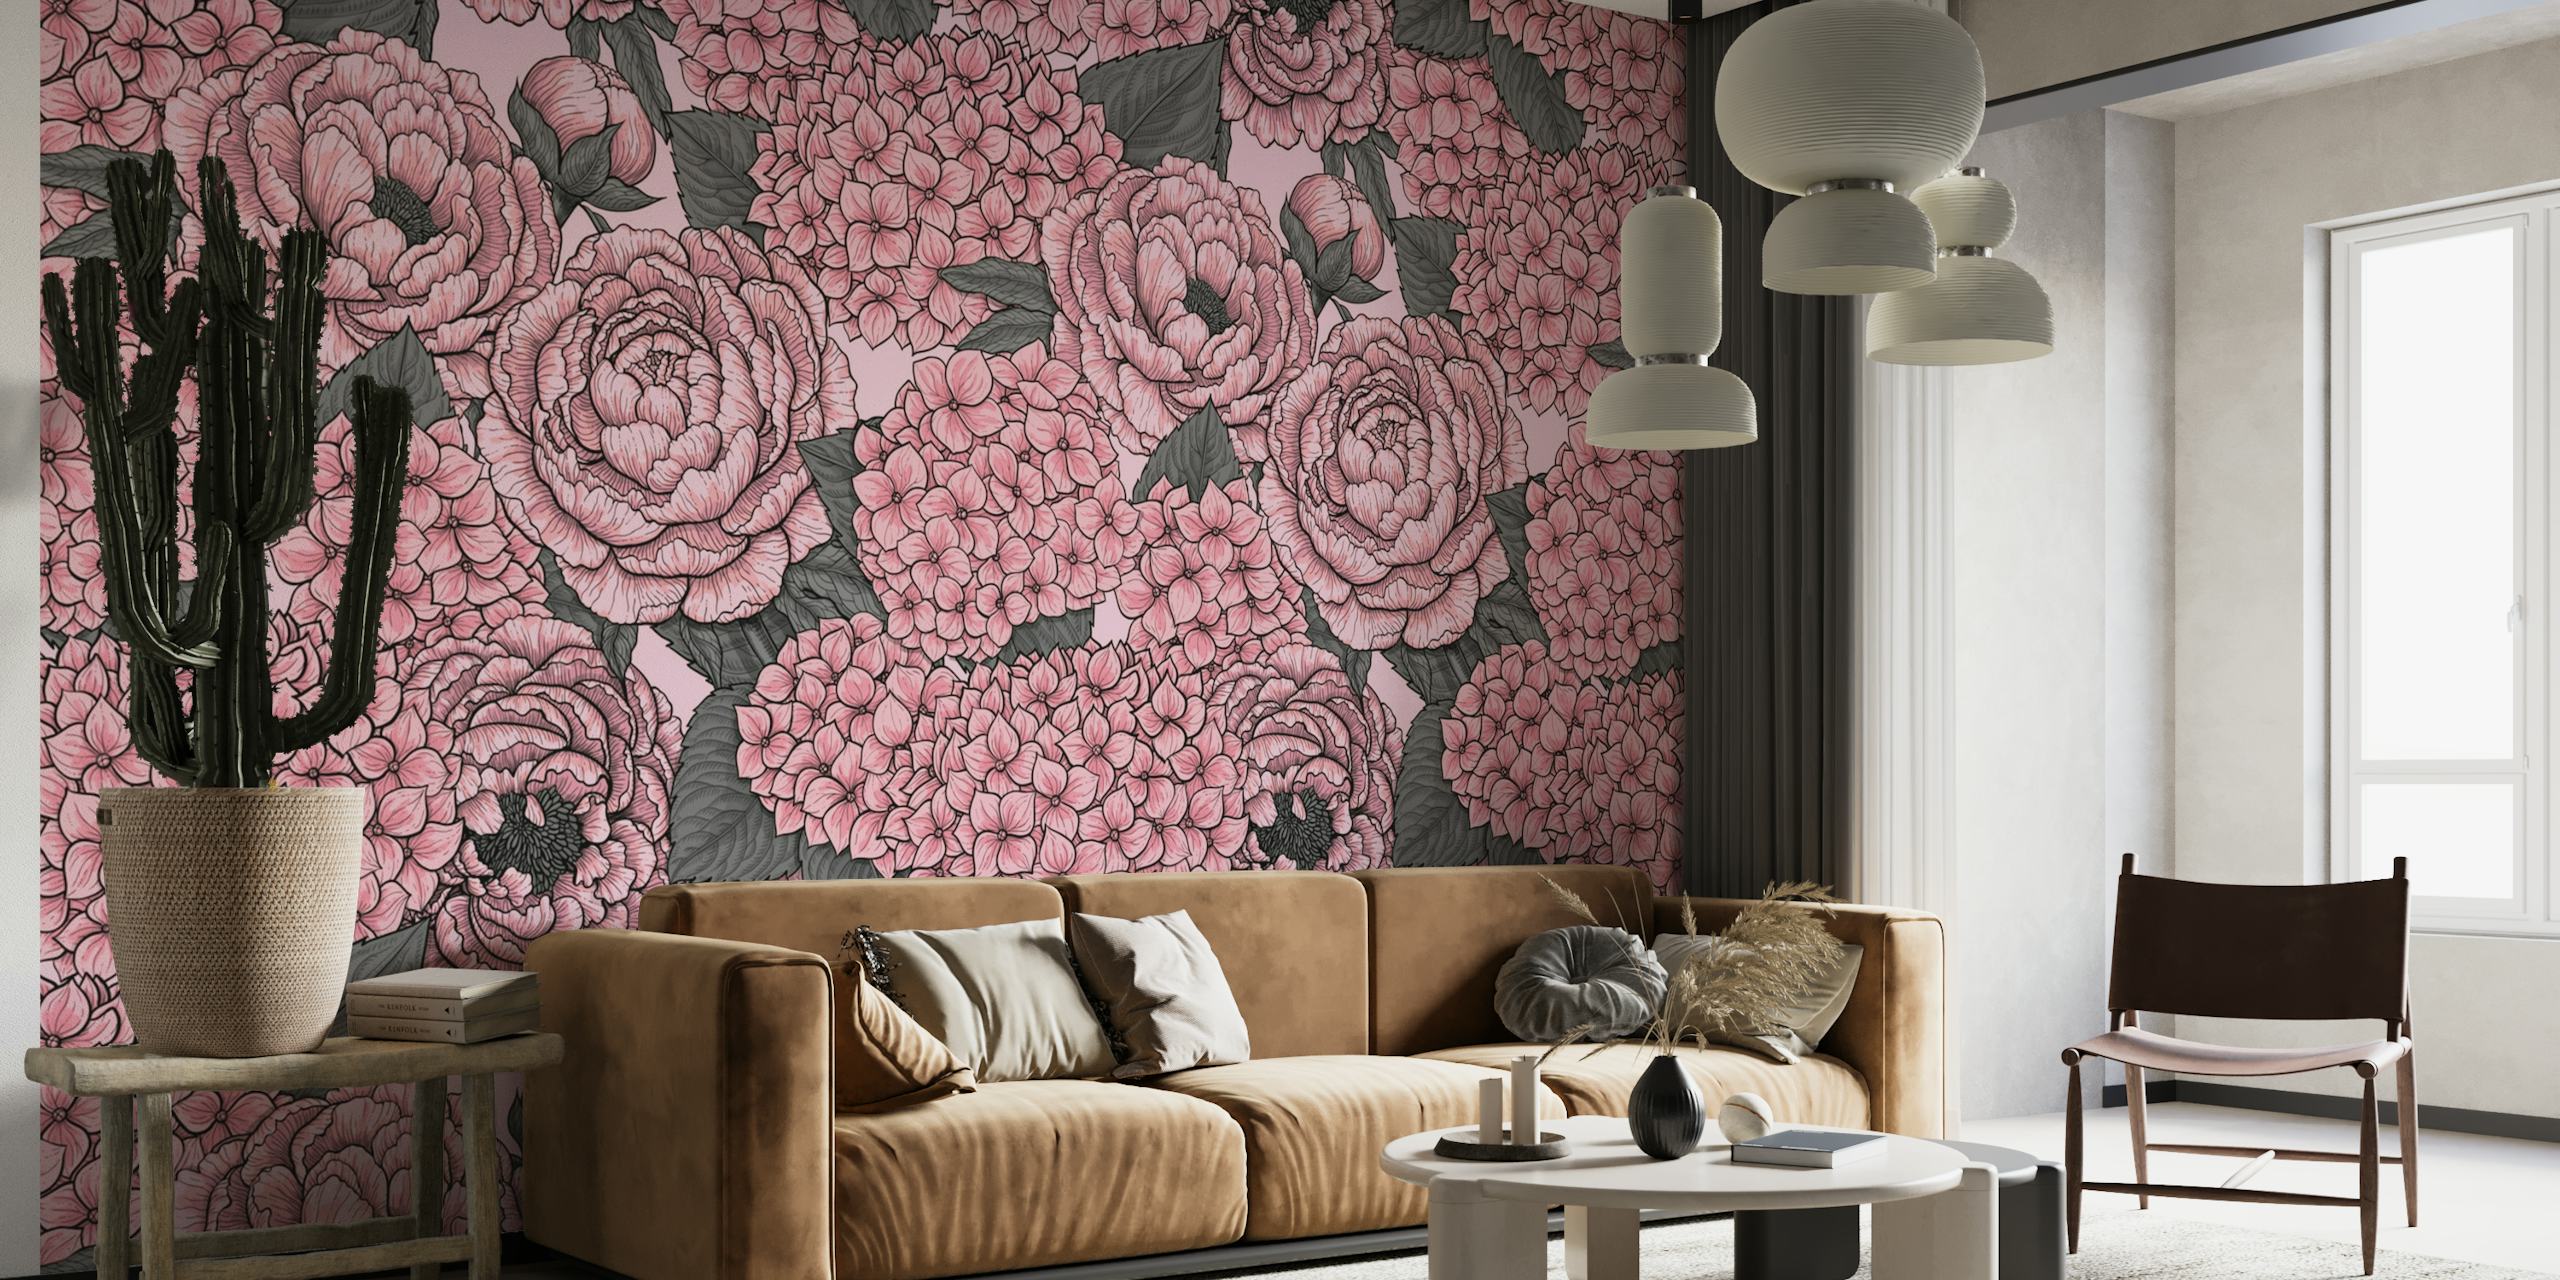 Pink peonies and hydrangeas wall mural on a textured background